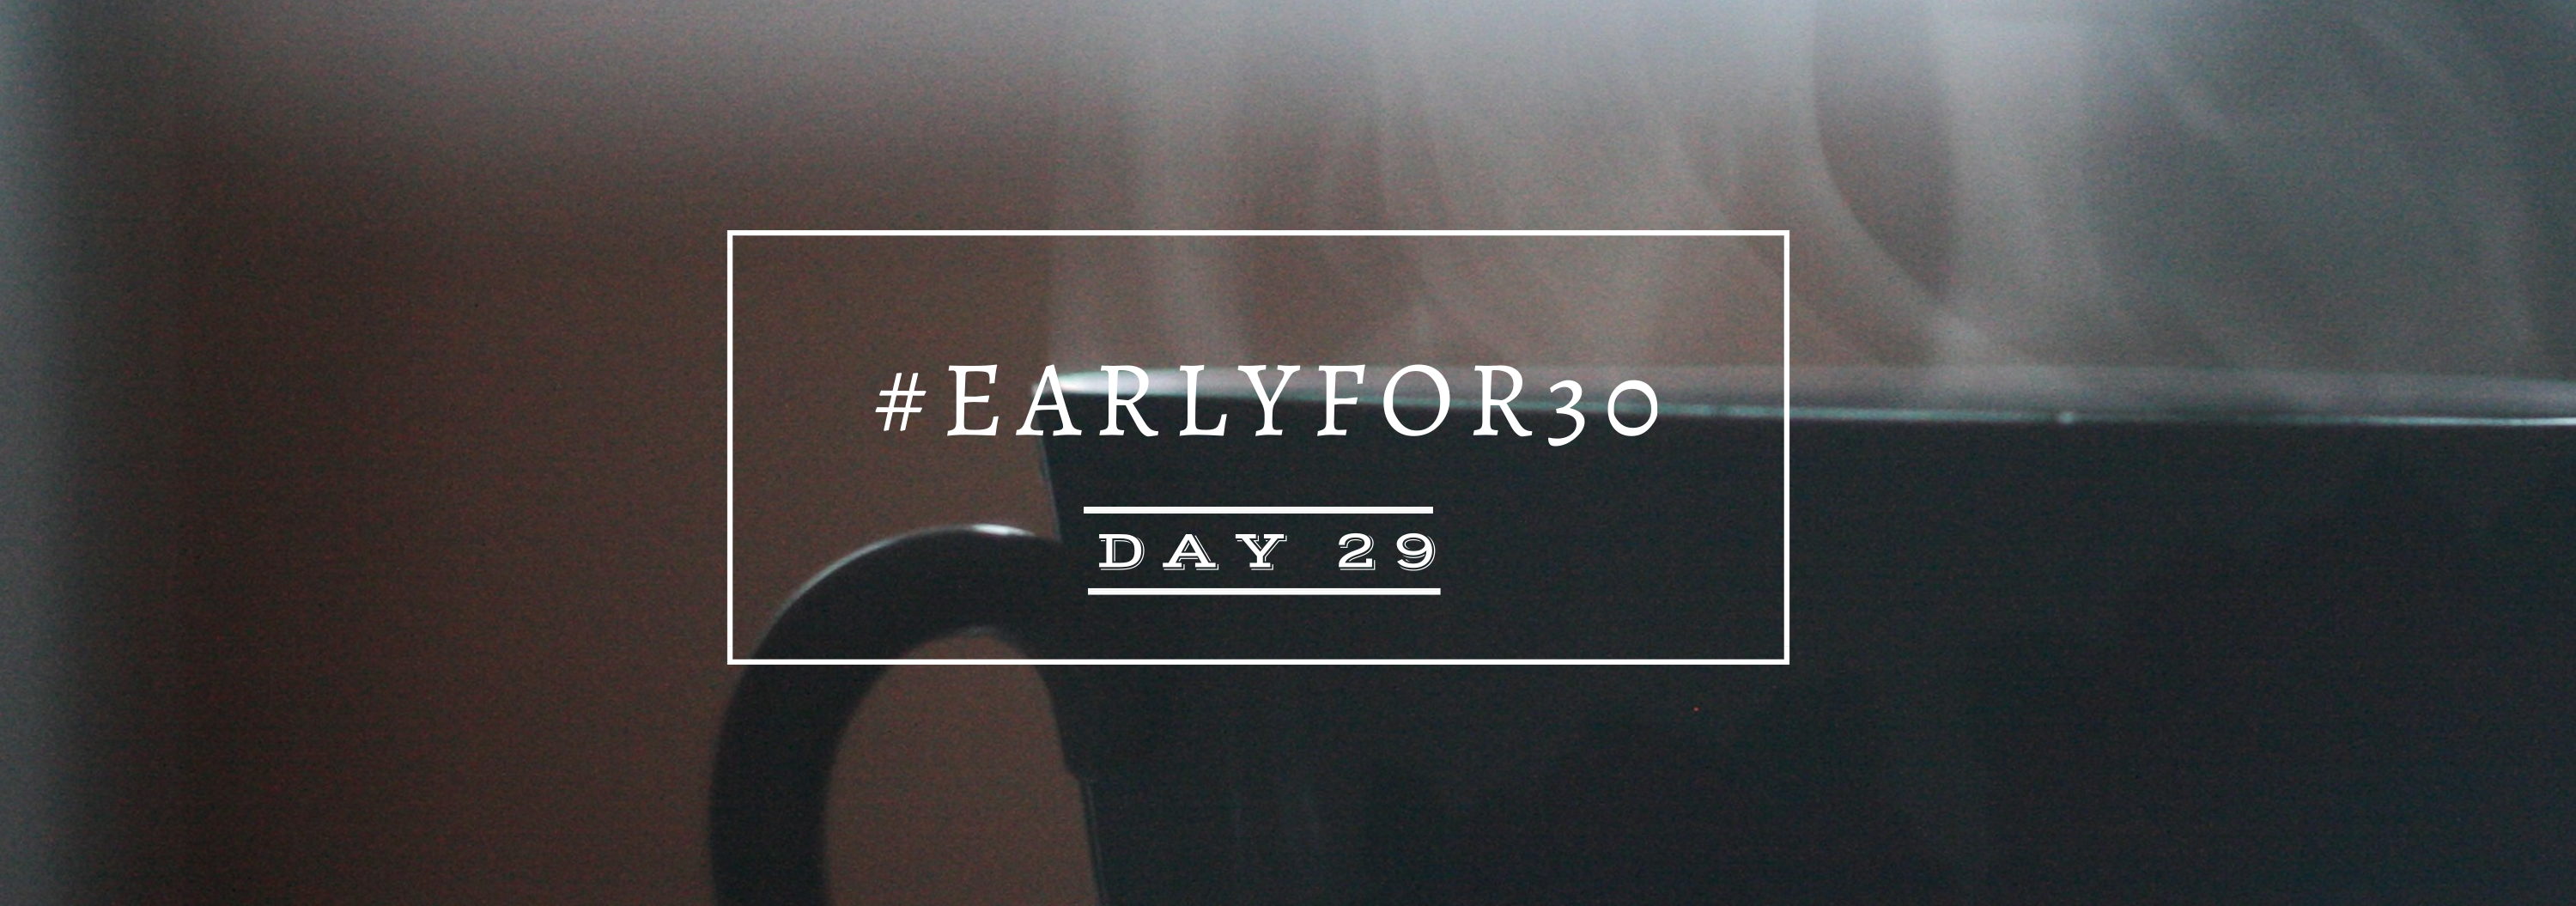 Day 29 Early for 30 Days Challenge